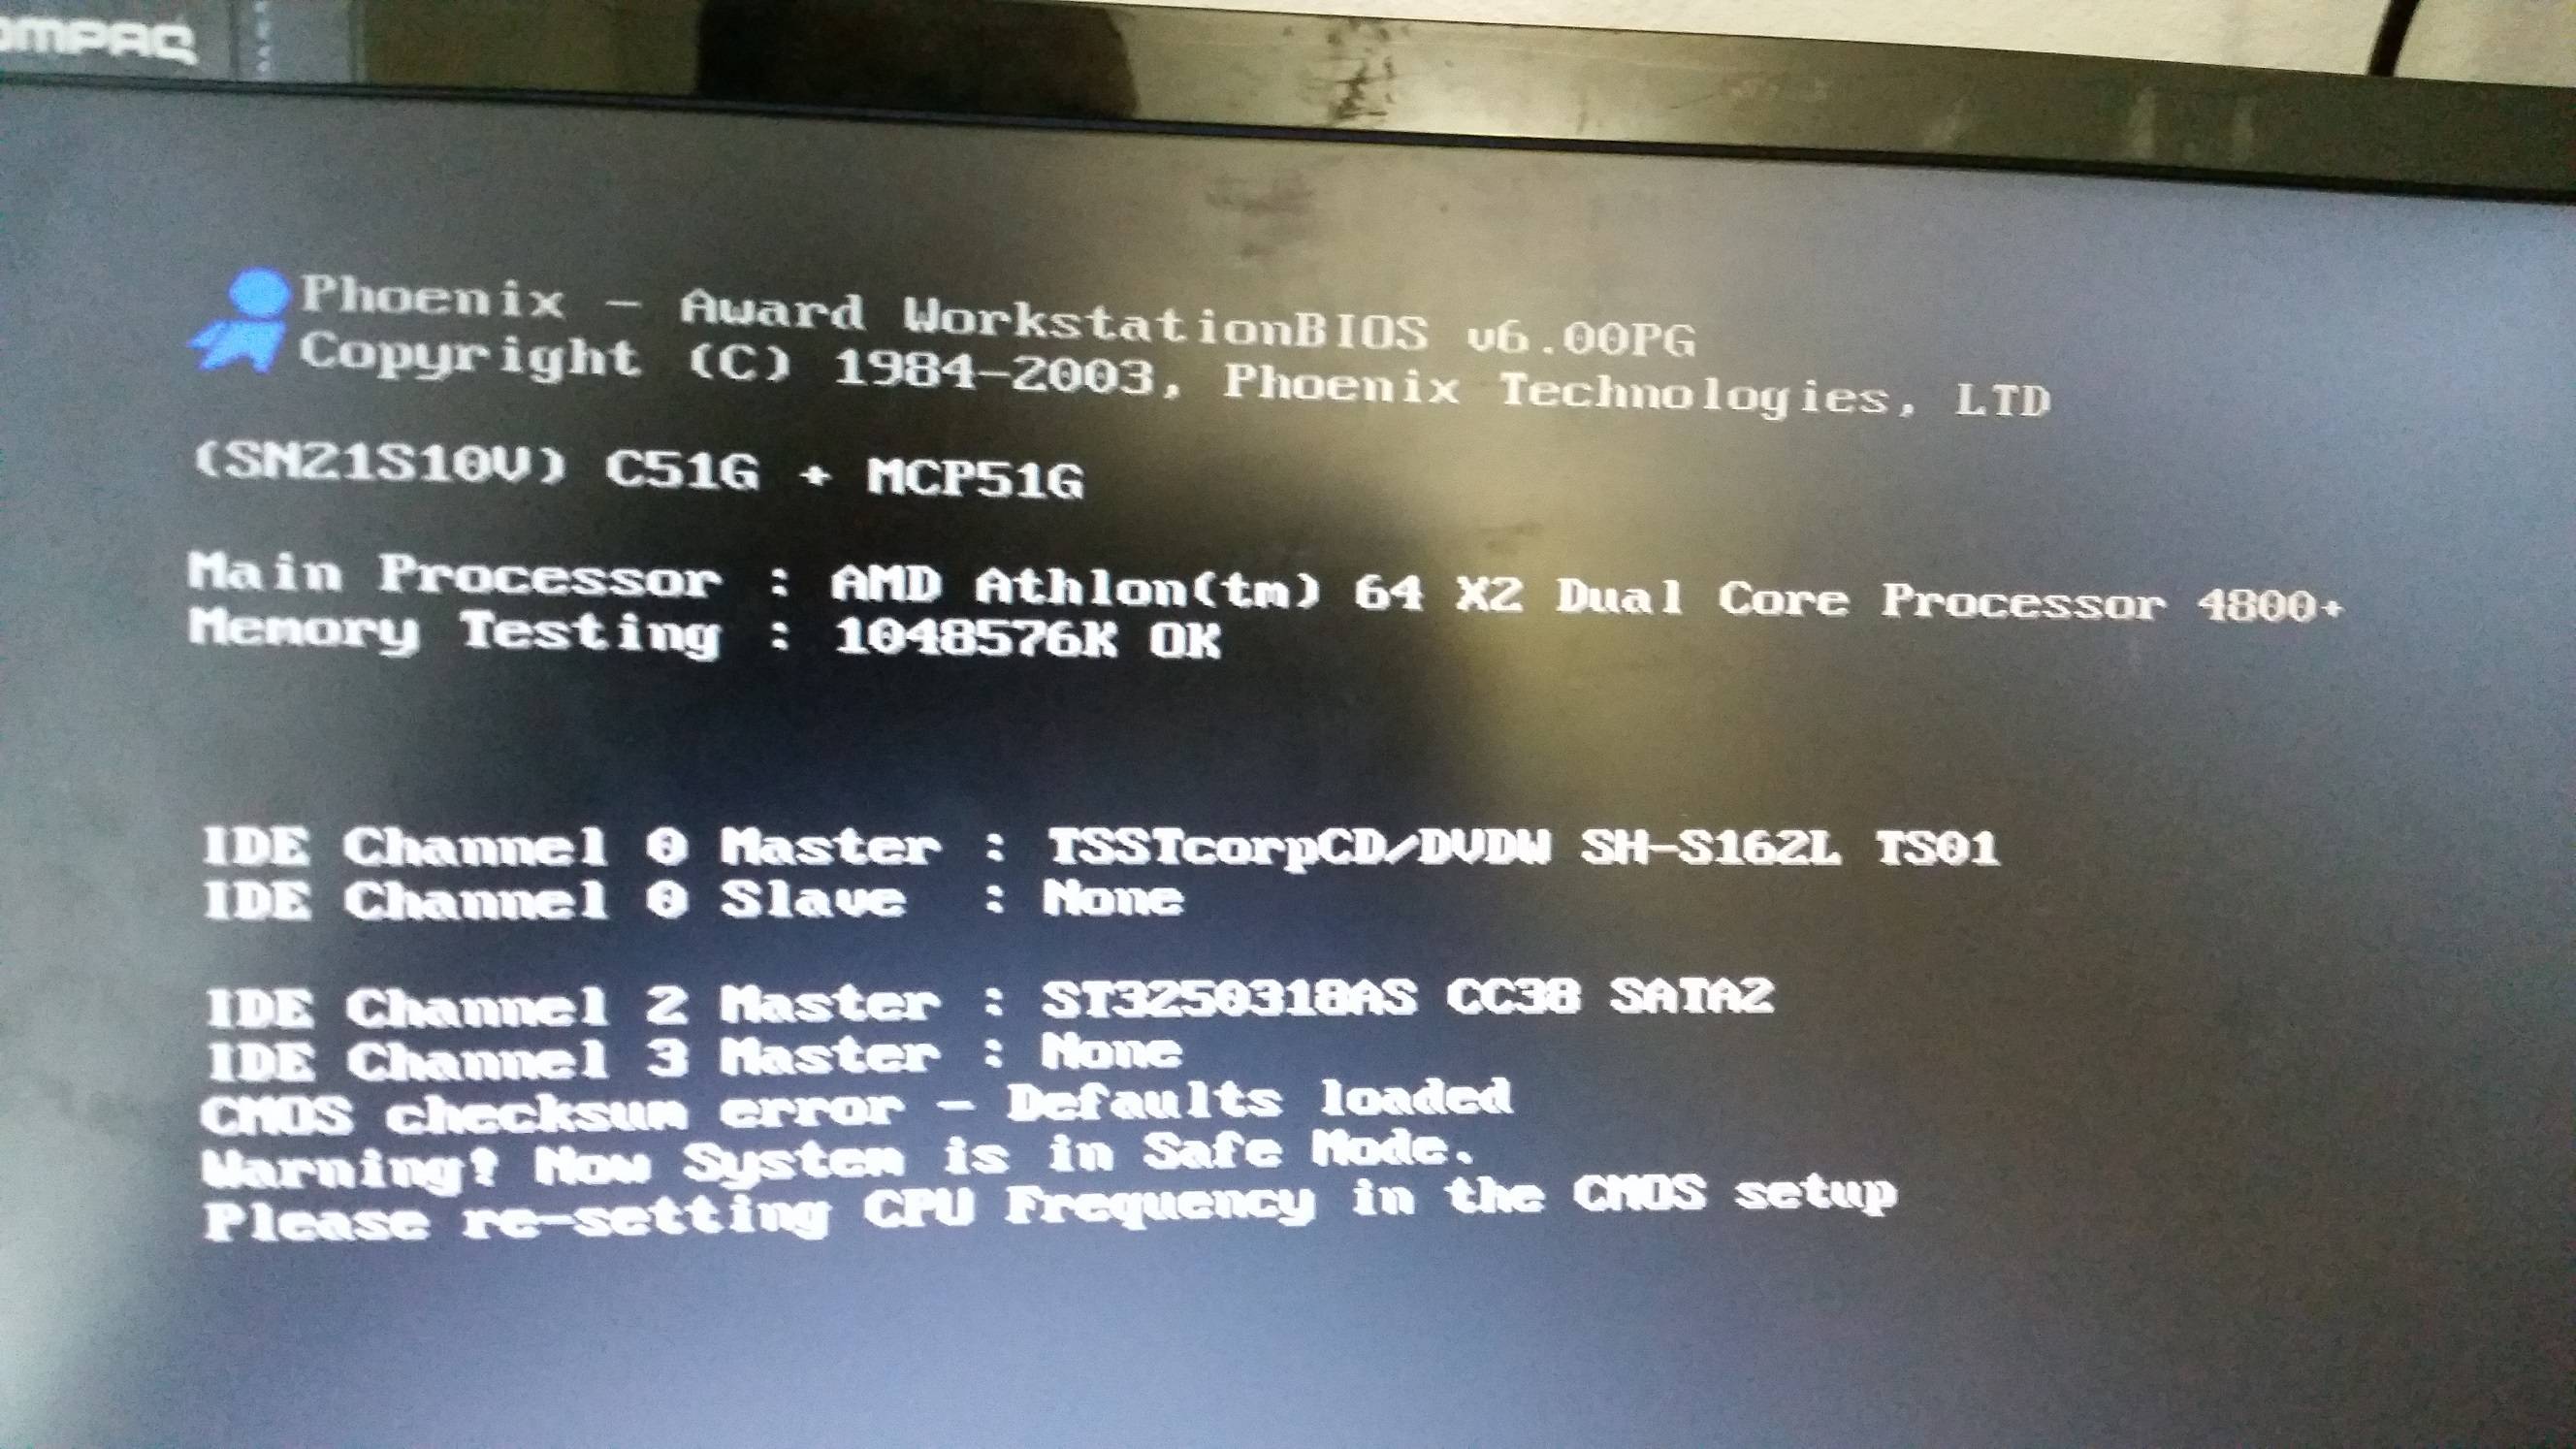 cpu is now in safe mode